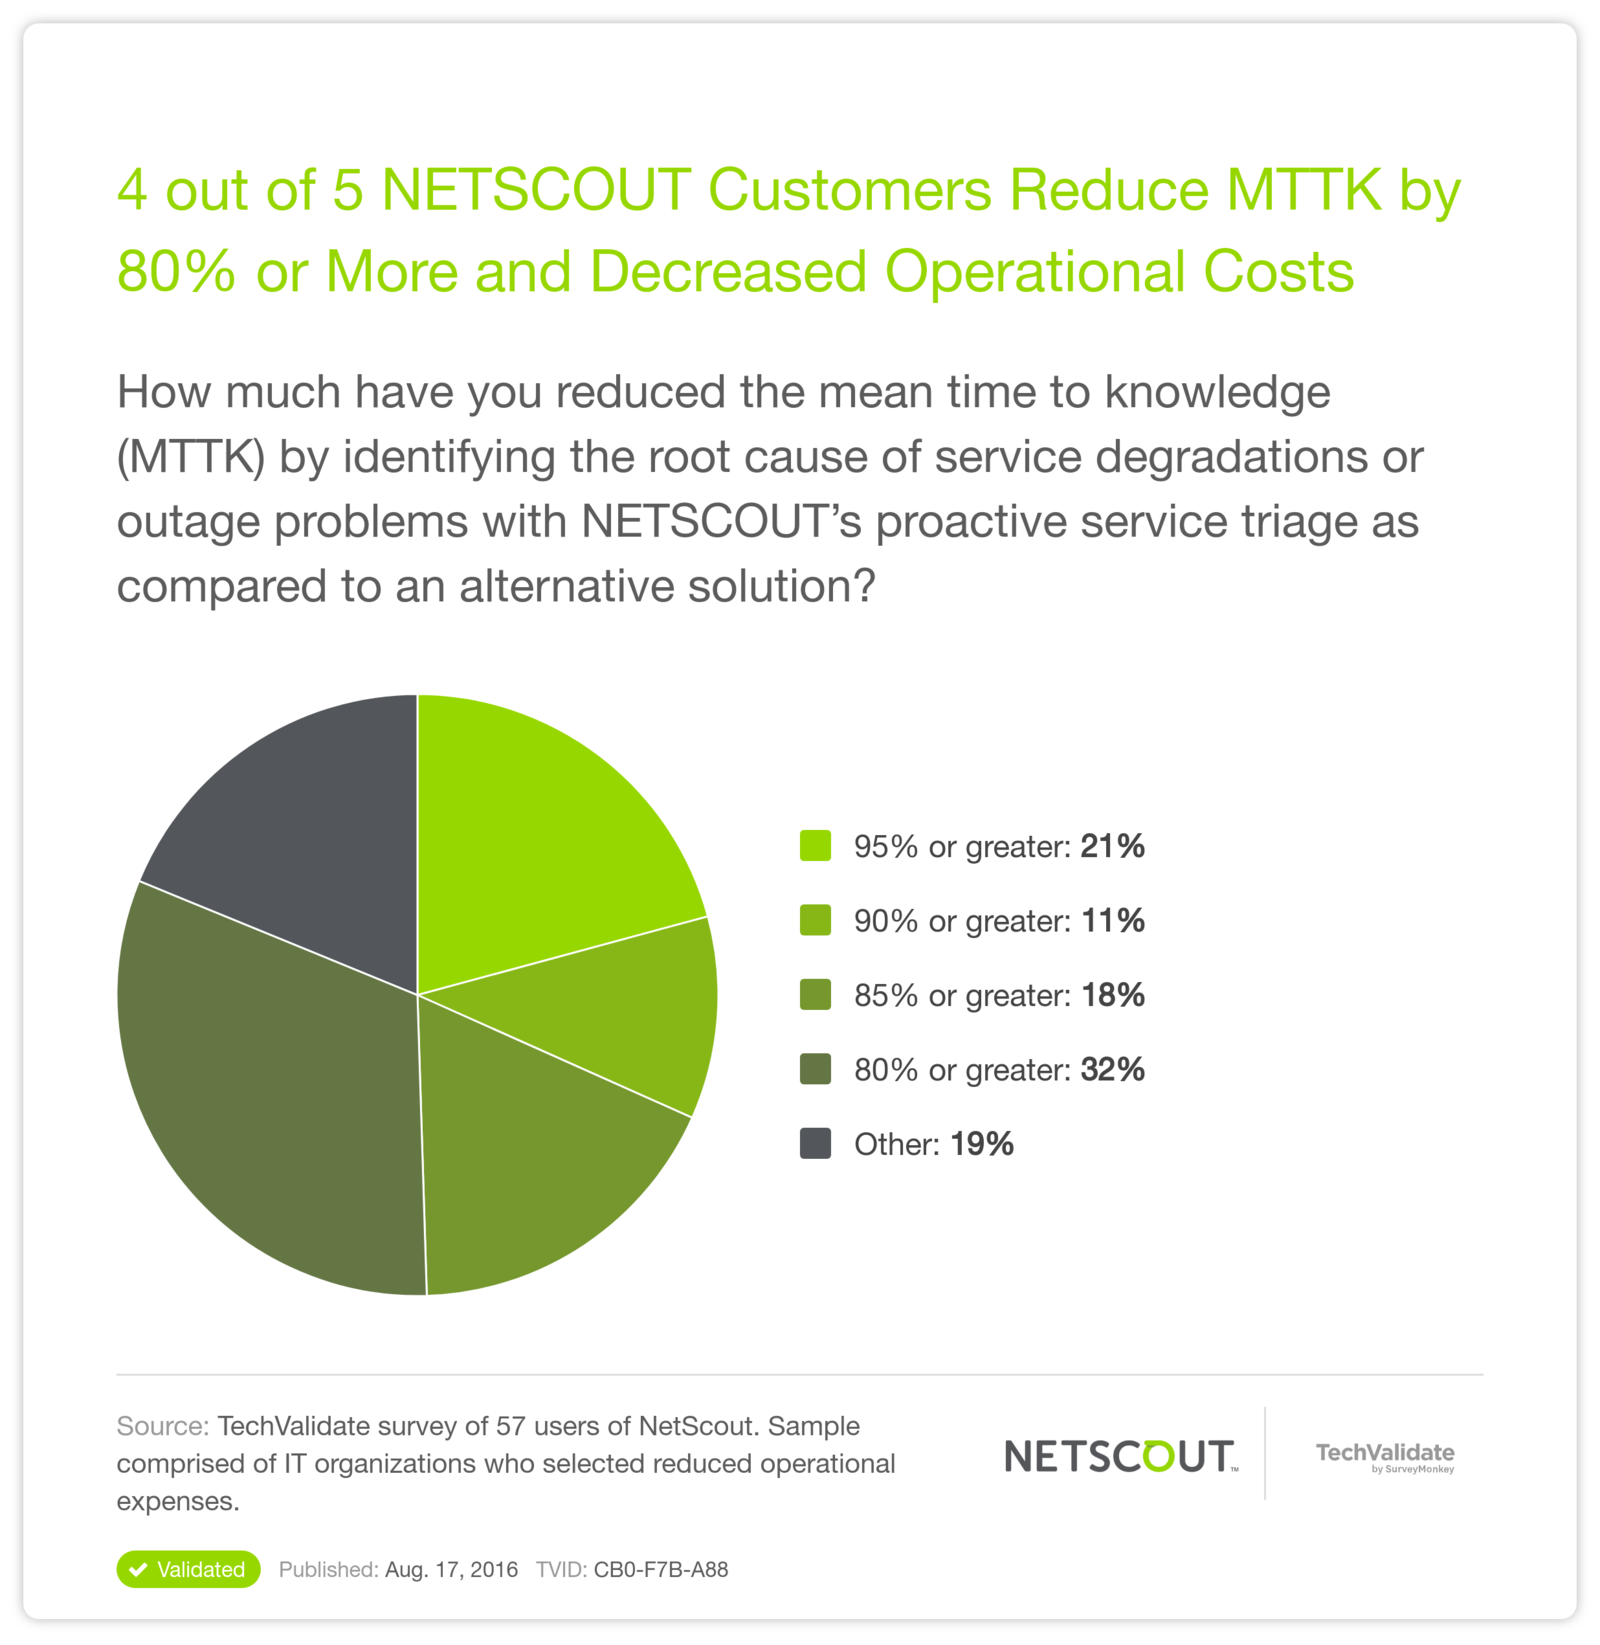 4 out of 5 NETSCOUT Customers Reduce MTTK by 80% or More and Decreased Operational Costs